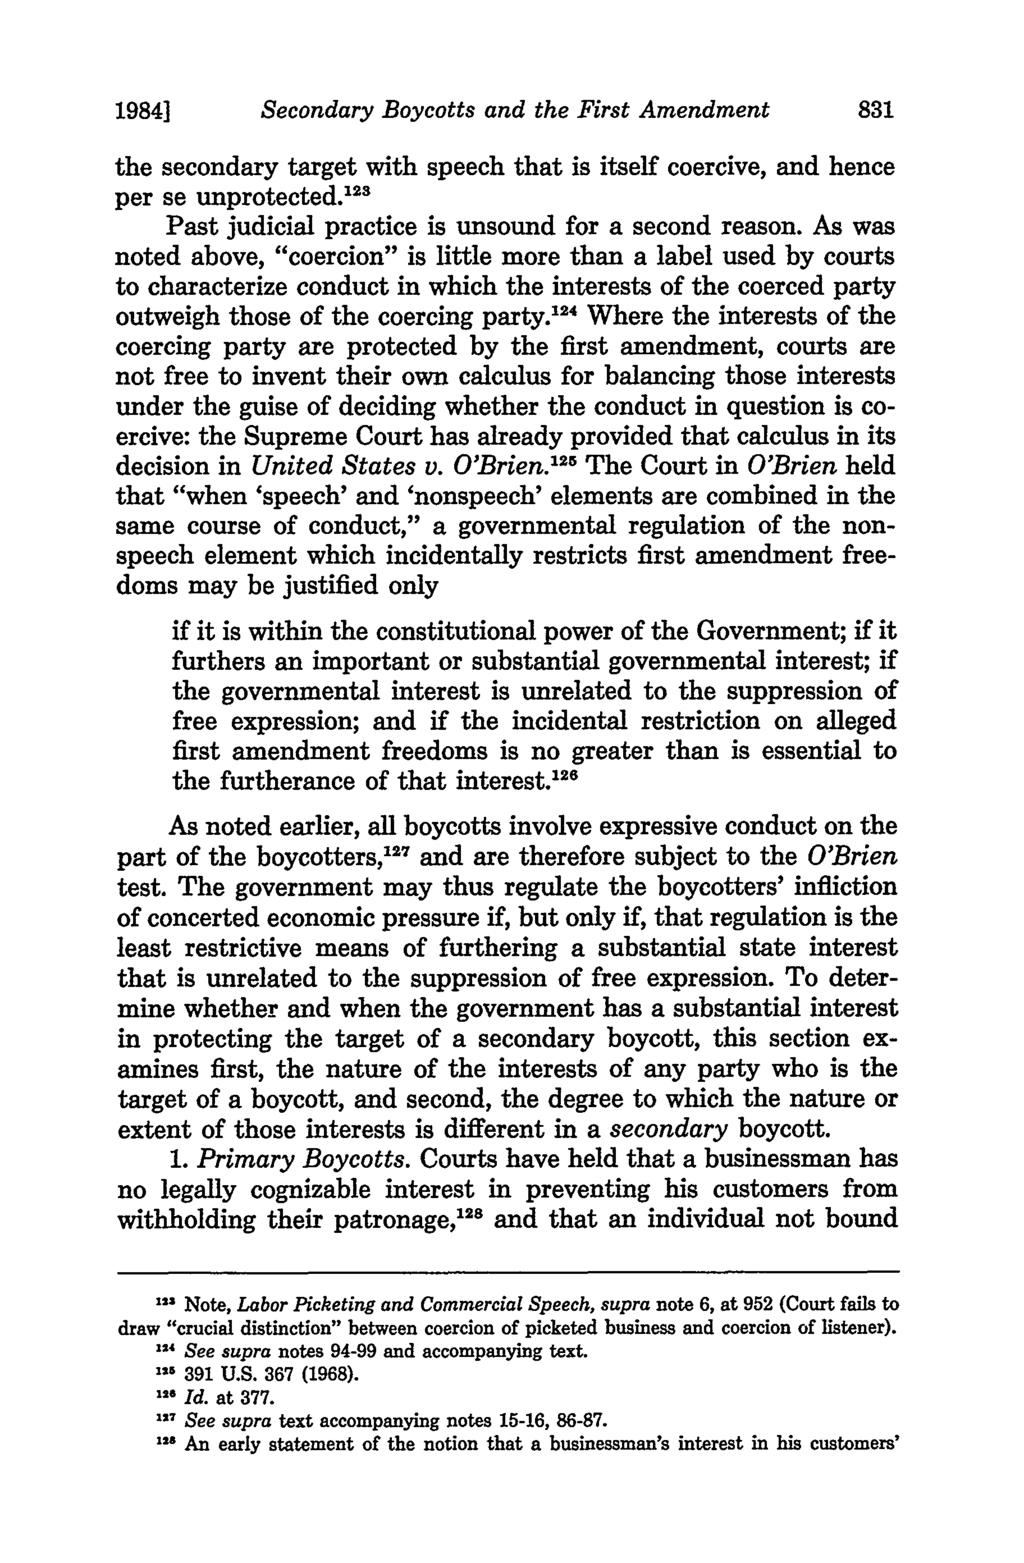 1984] Secondary Boycotts and the First Amendment the secondary target with speech that is itself coercive, and hence per se unprotected."' 3 Past judicial practice is unsound for a second reason.